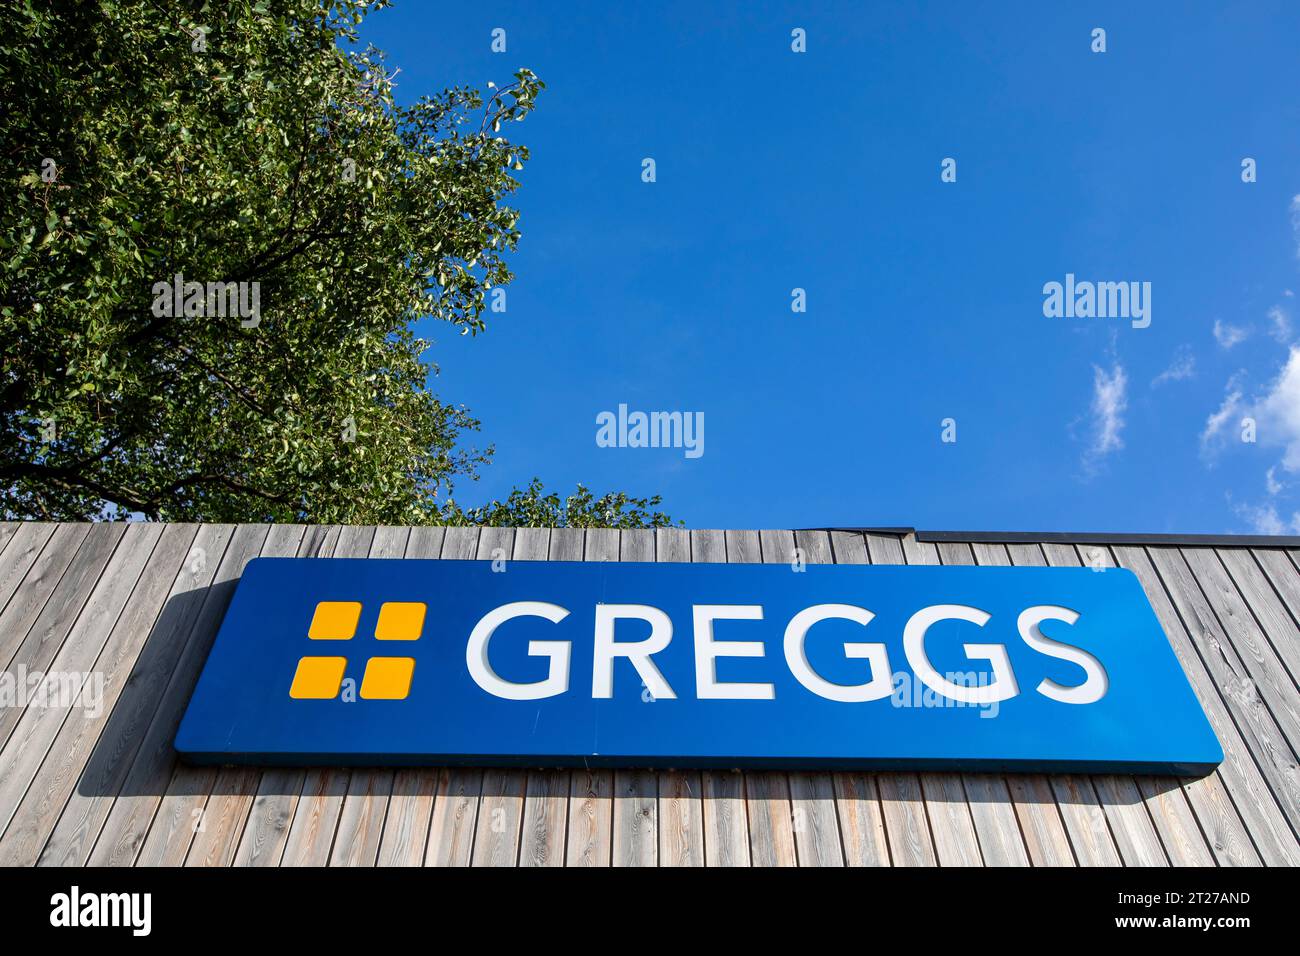 Greggs plc is a British bakery chain. It specialises in savoury products such as bakes, sausage rolls, sandwiches and sweet items including doughnuts and vanilla slices. It is headquartered in Newcastle upon Tyne, England. It is listed on the London Stock Exchange, and is a constituent of the FTSE 250 Index. Originally a high street chain, it has since entered the convenience and drive-thru markets, this achieved mainly through its partnership with EG Group. Stock Photo